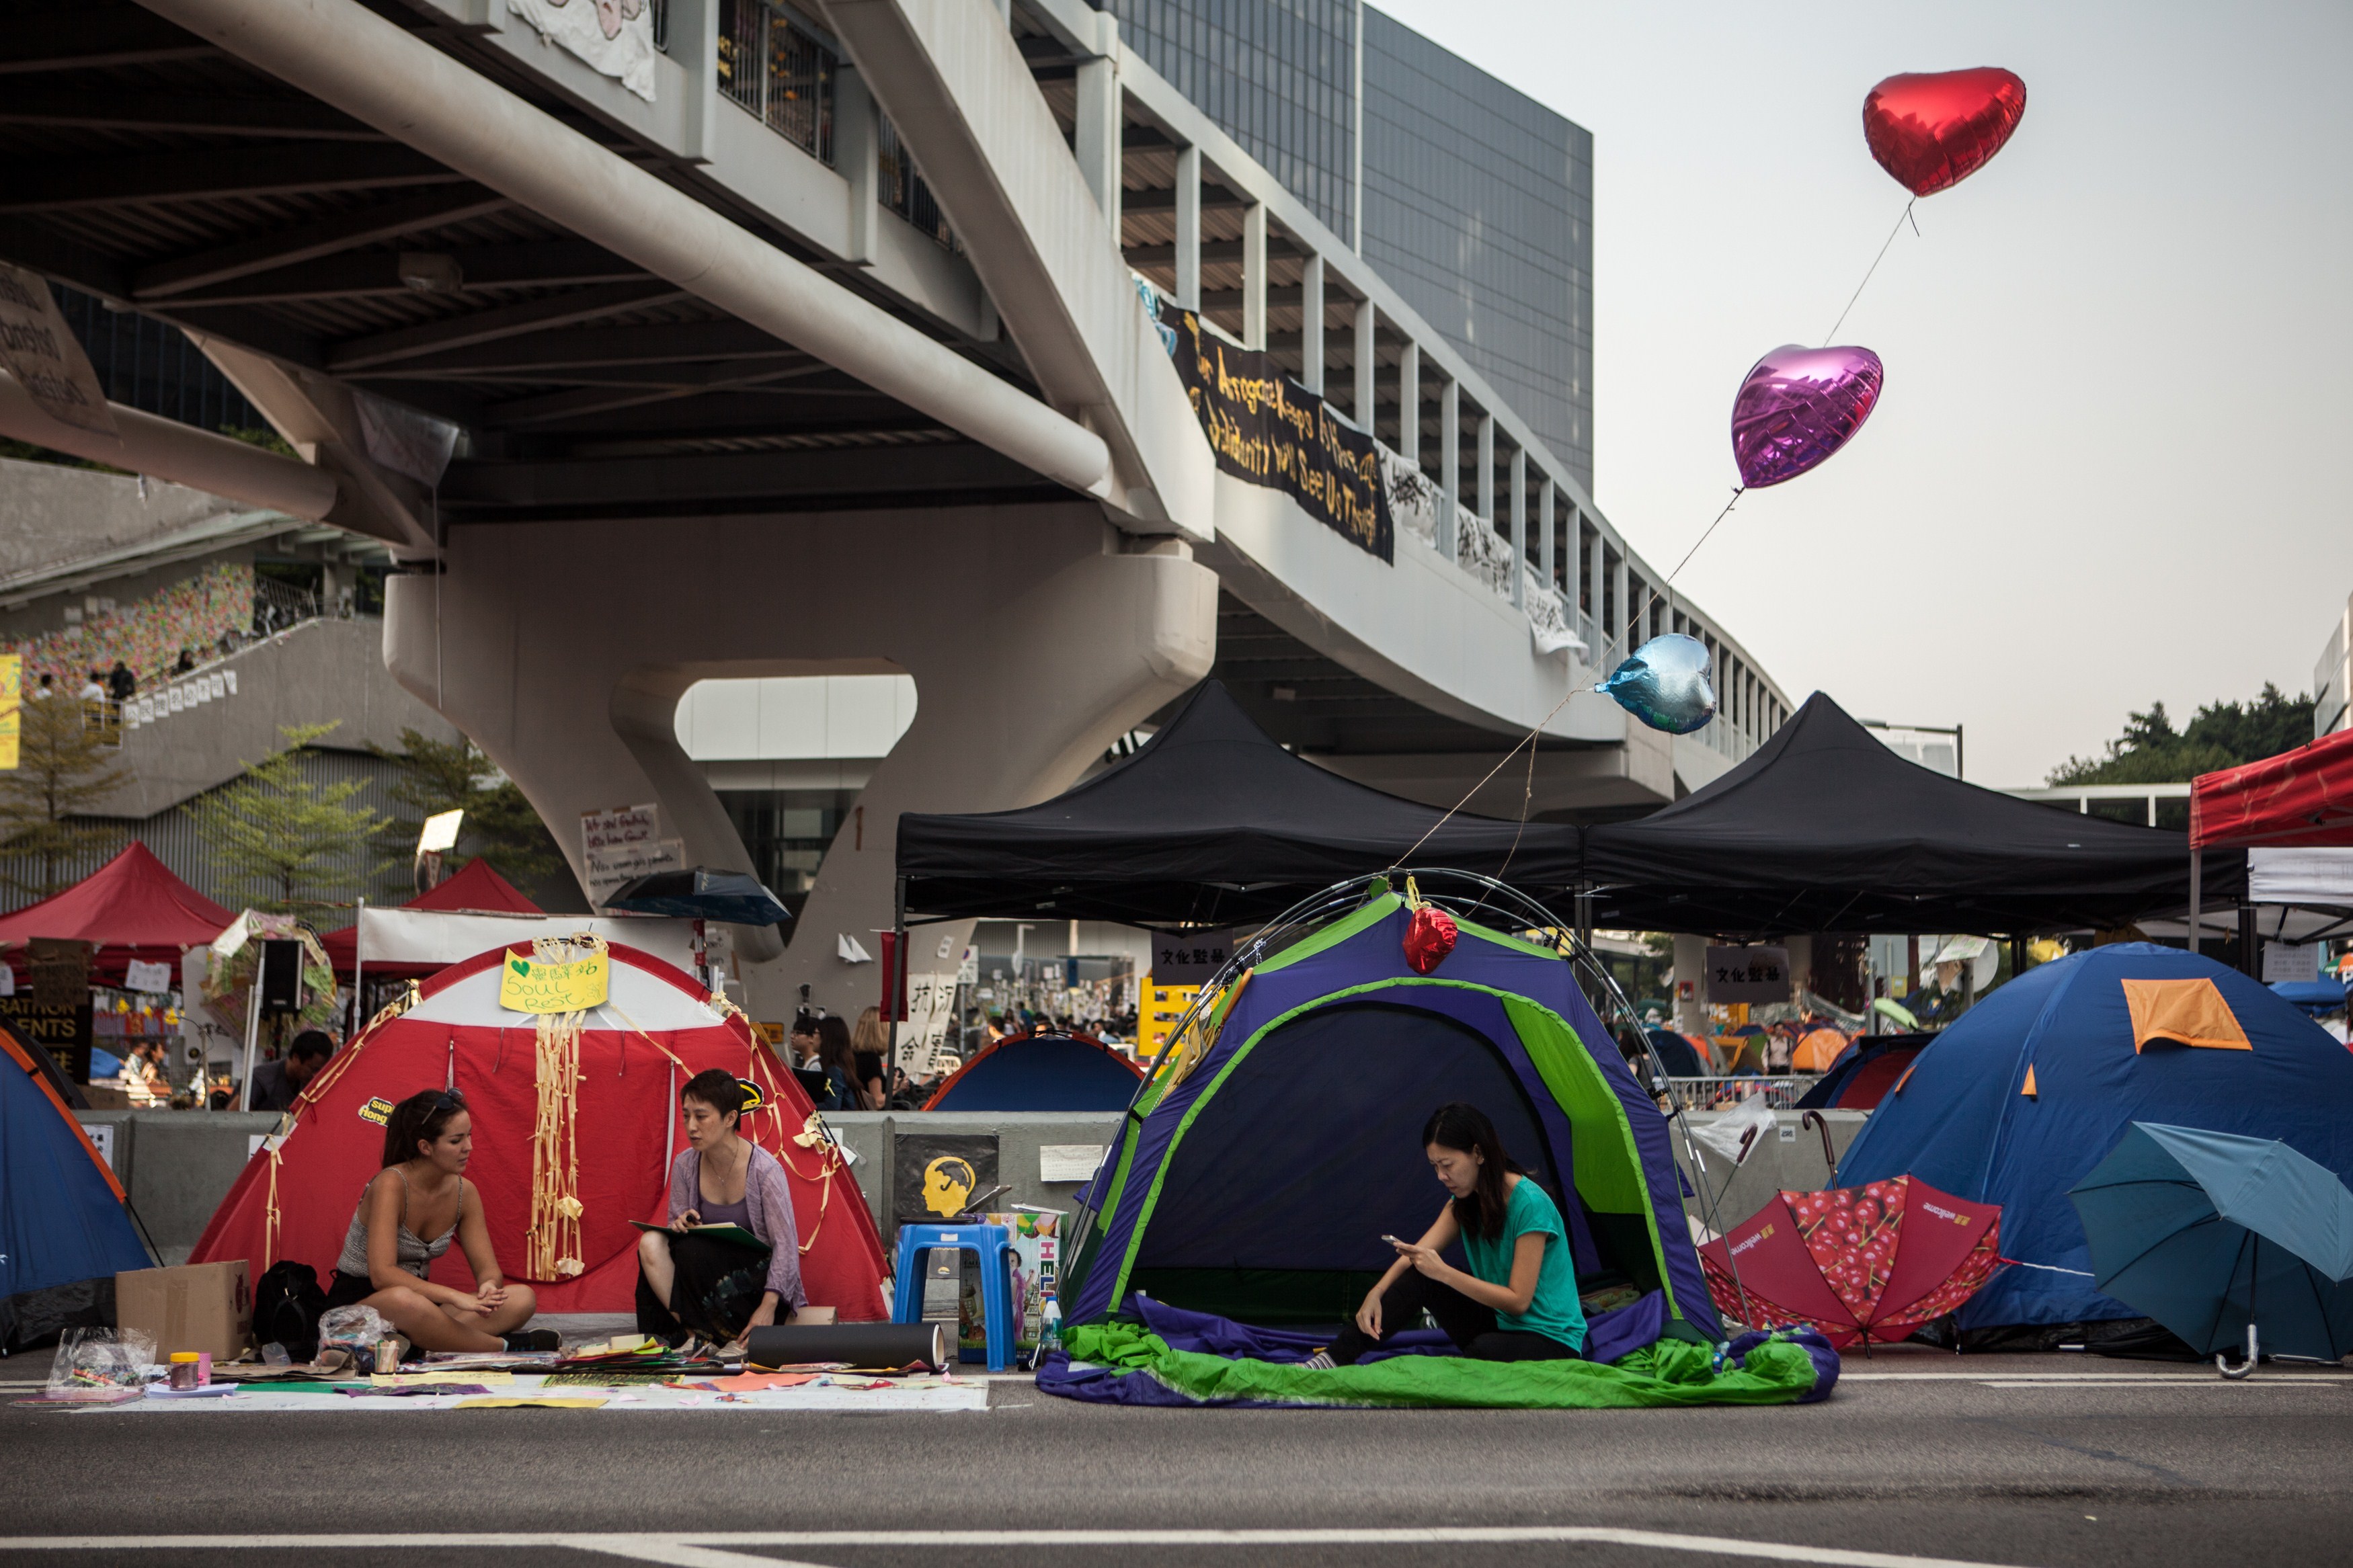 Members of the Occupied movement rest in their tents on a highway blocked by protestor barricades in the Admiralty district of Hong Kong on October 16, 2014. (ANTHONY WALLACE—AFP/Getty Images)